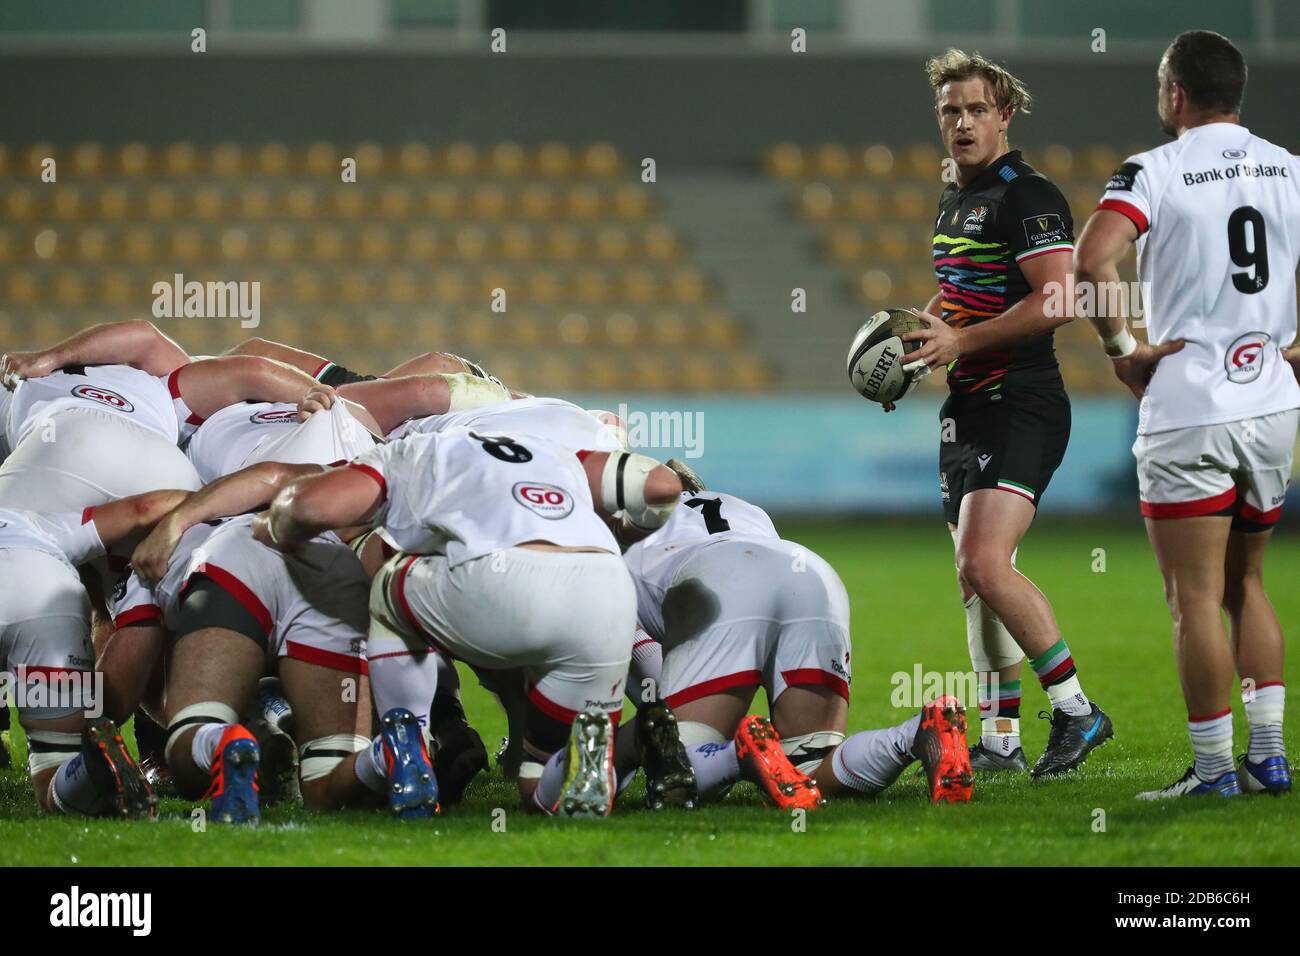 Parma, Italy. 16th Nov, 2020. parma, Italy, Sergio Lanfranchi stadium, 16 Nov 2020, Joshua Renton is ready for the scrum during Zebre Rugby vs Ulster Rugby - Rugby Guinness Pro 14 match - Credit: LM/Massimiliano Carnabuci Credit: Massimiliano Carnabuci/LPS/ZUMA Wire/Alamy Live News Stock Photo